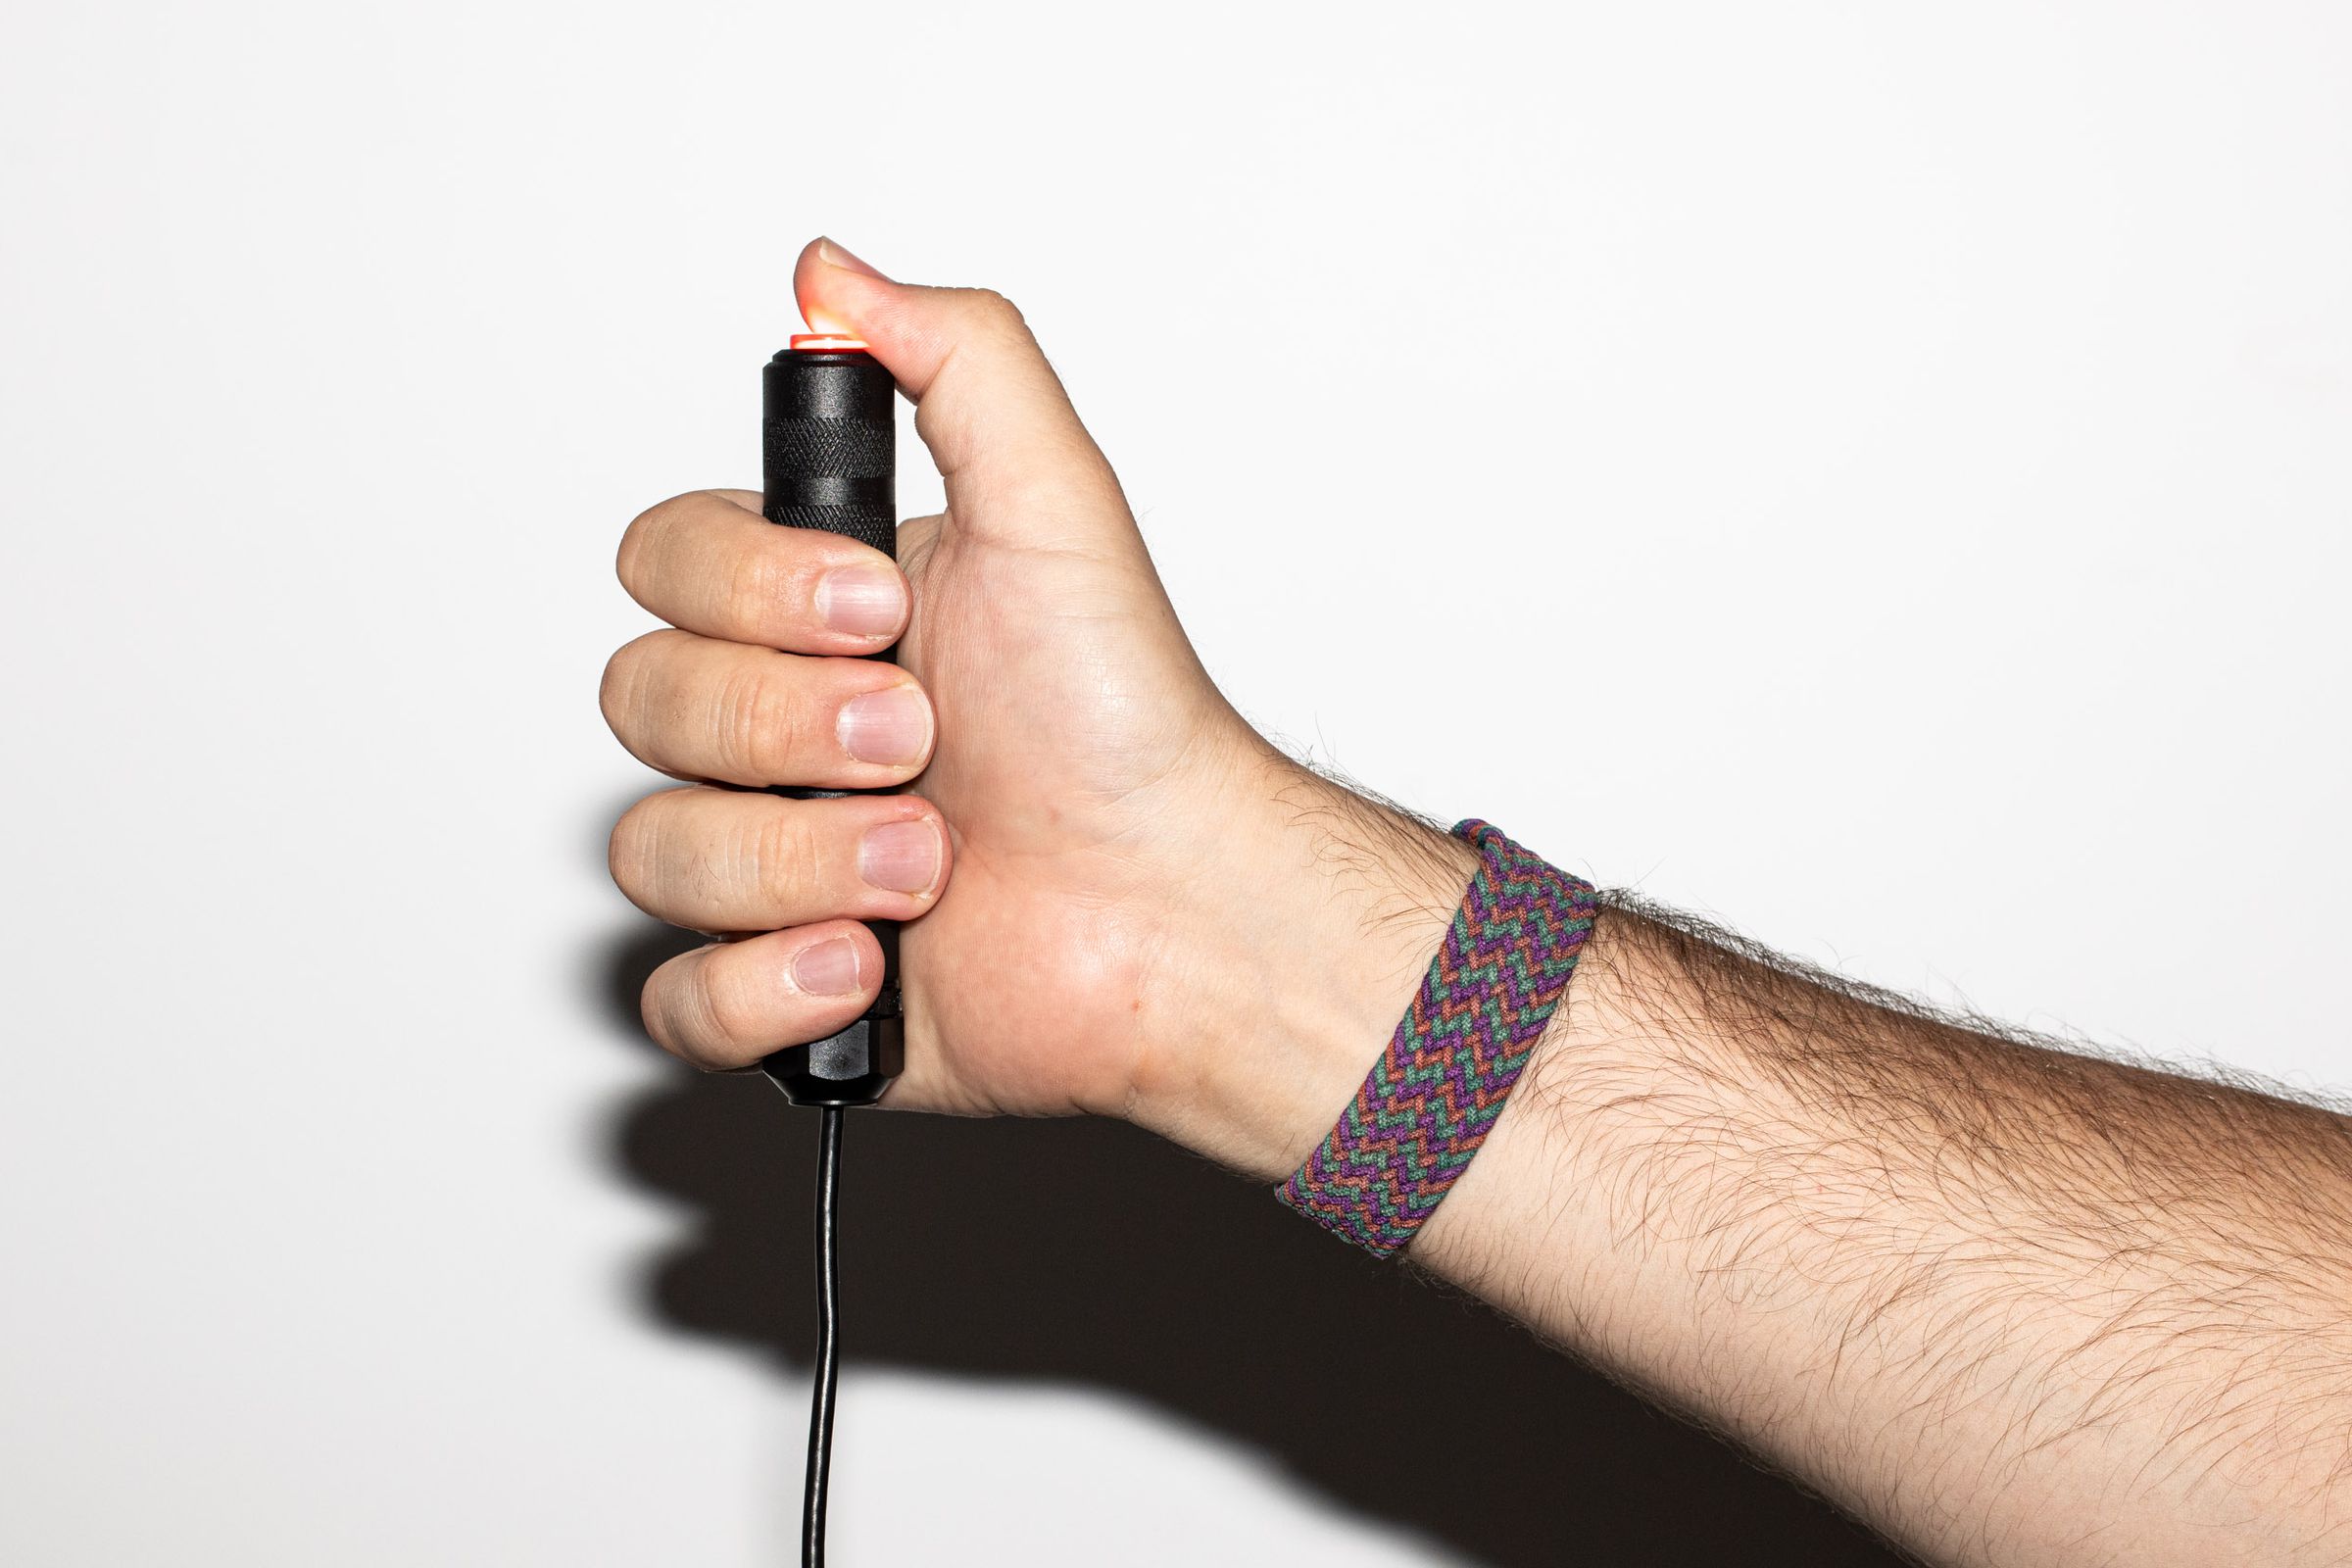 An arm grasps a fist-sized round black metal rod with a glowing red button on top, just underneath the thumb.